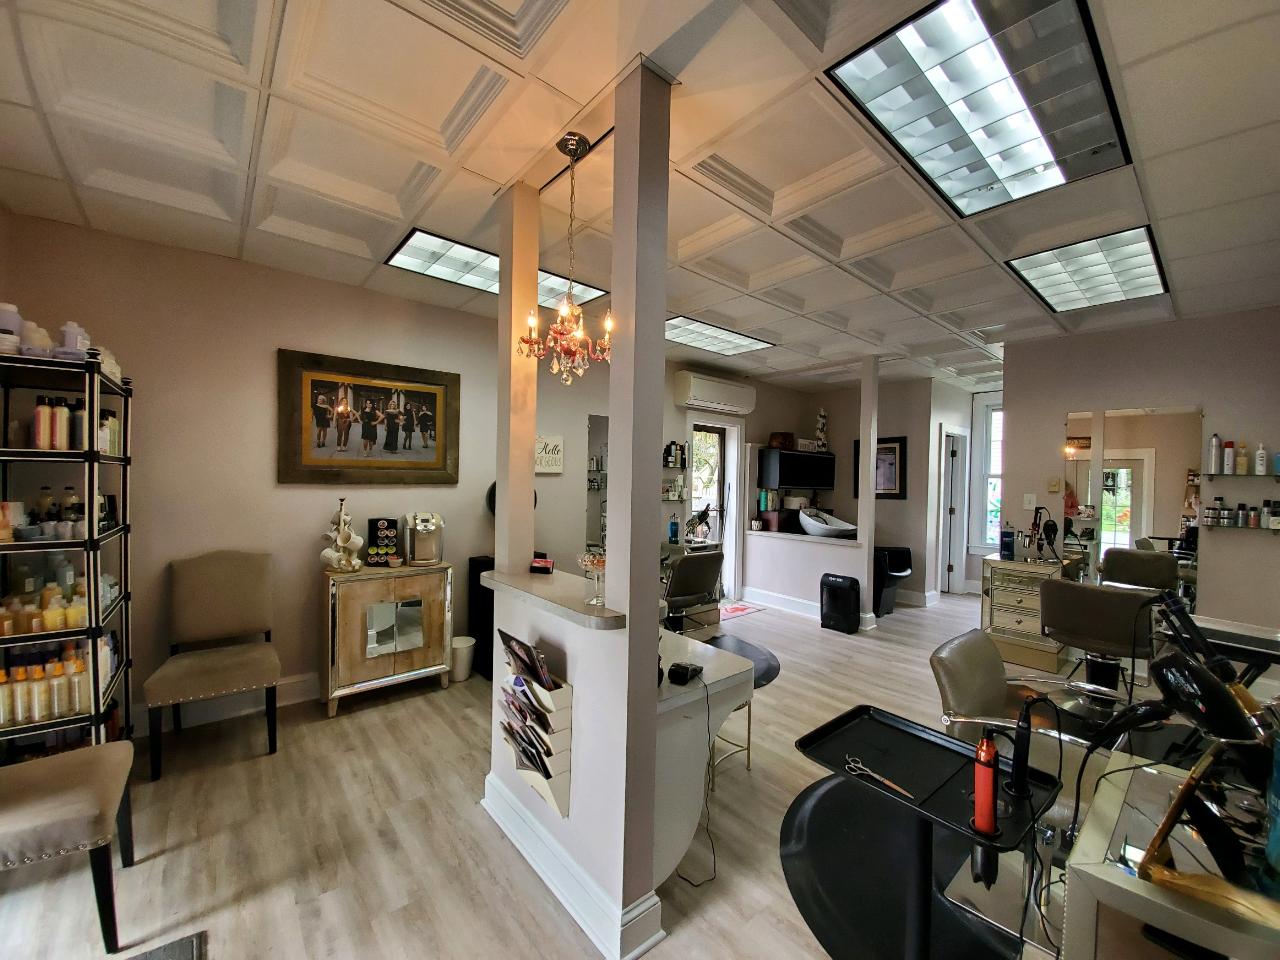 Town & Country Salon